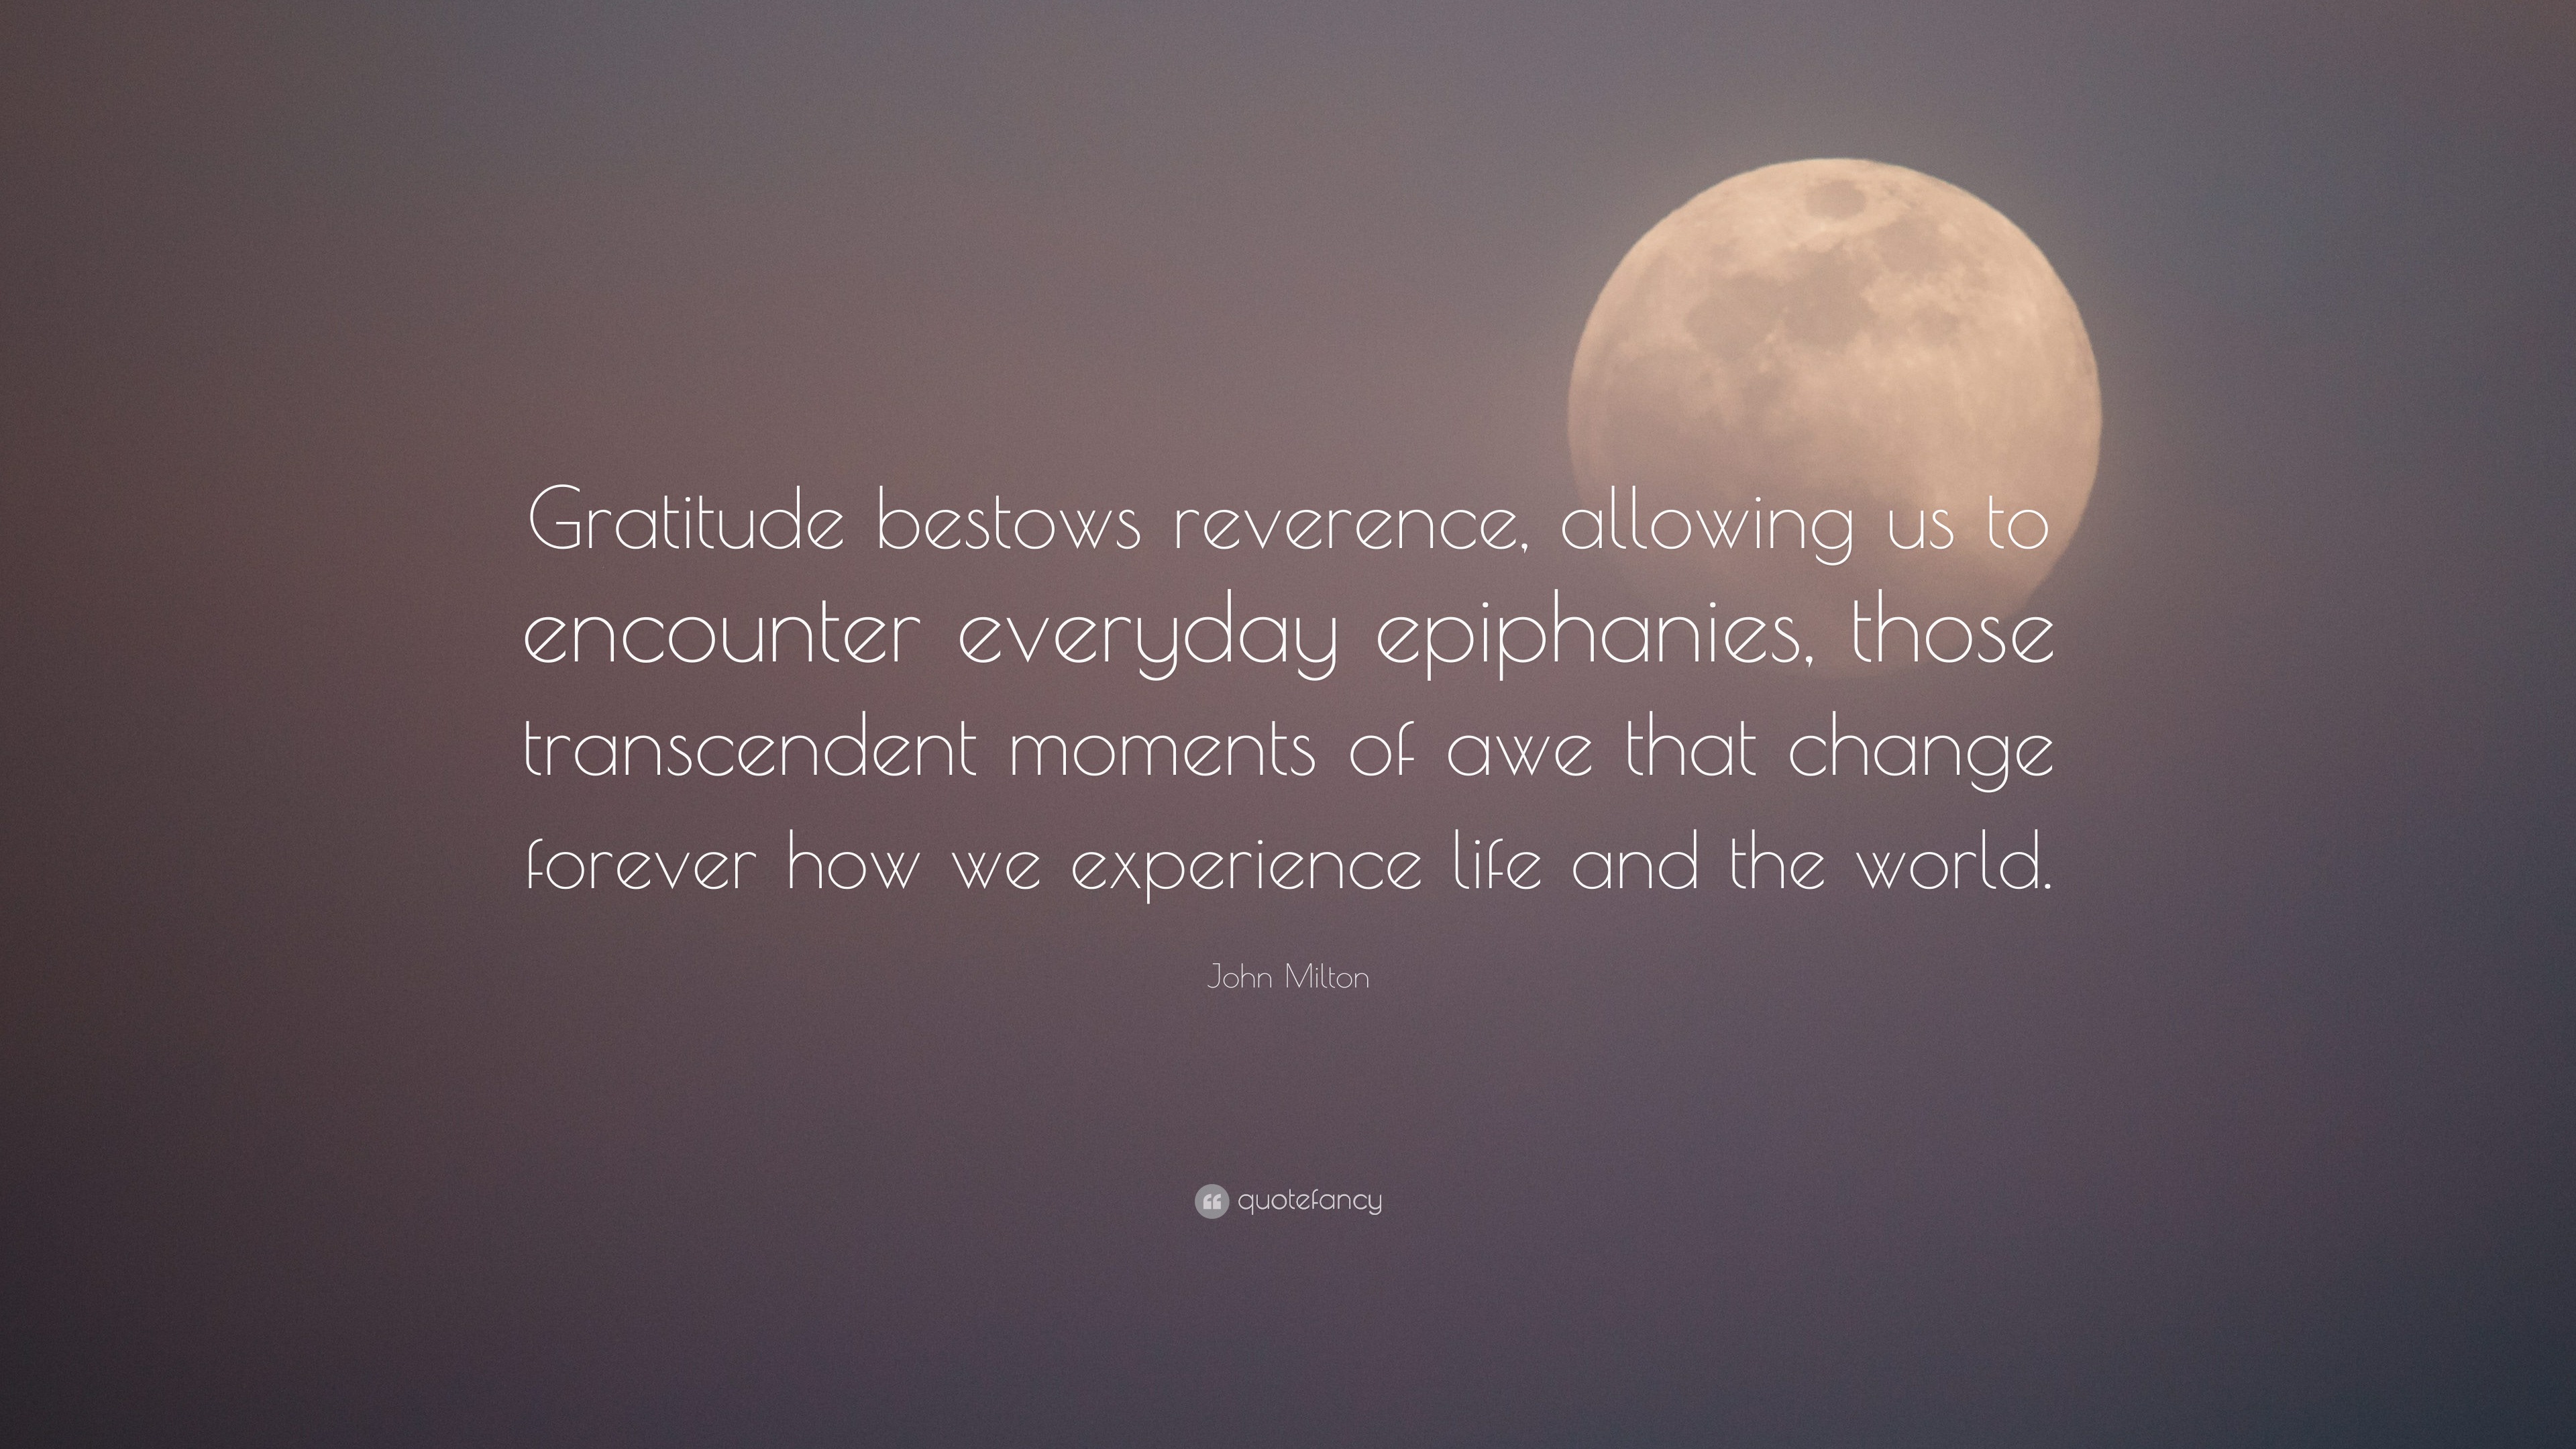 quotes about life changing moments john milton quote u201cgratitude bestows reverence allowing us to